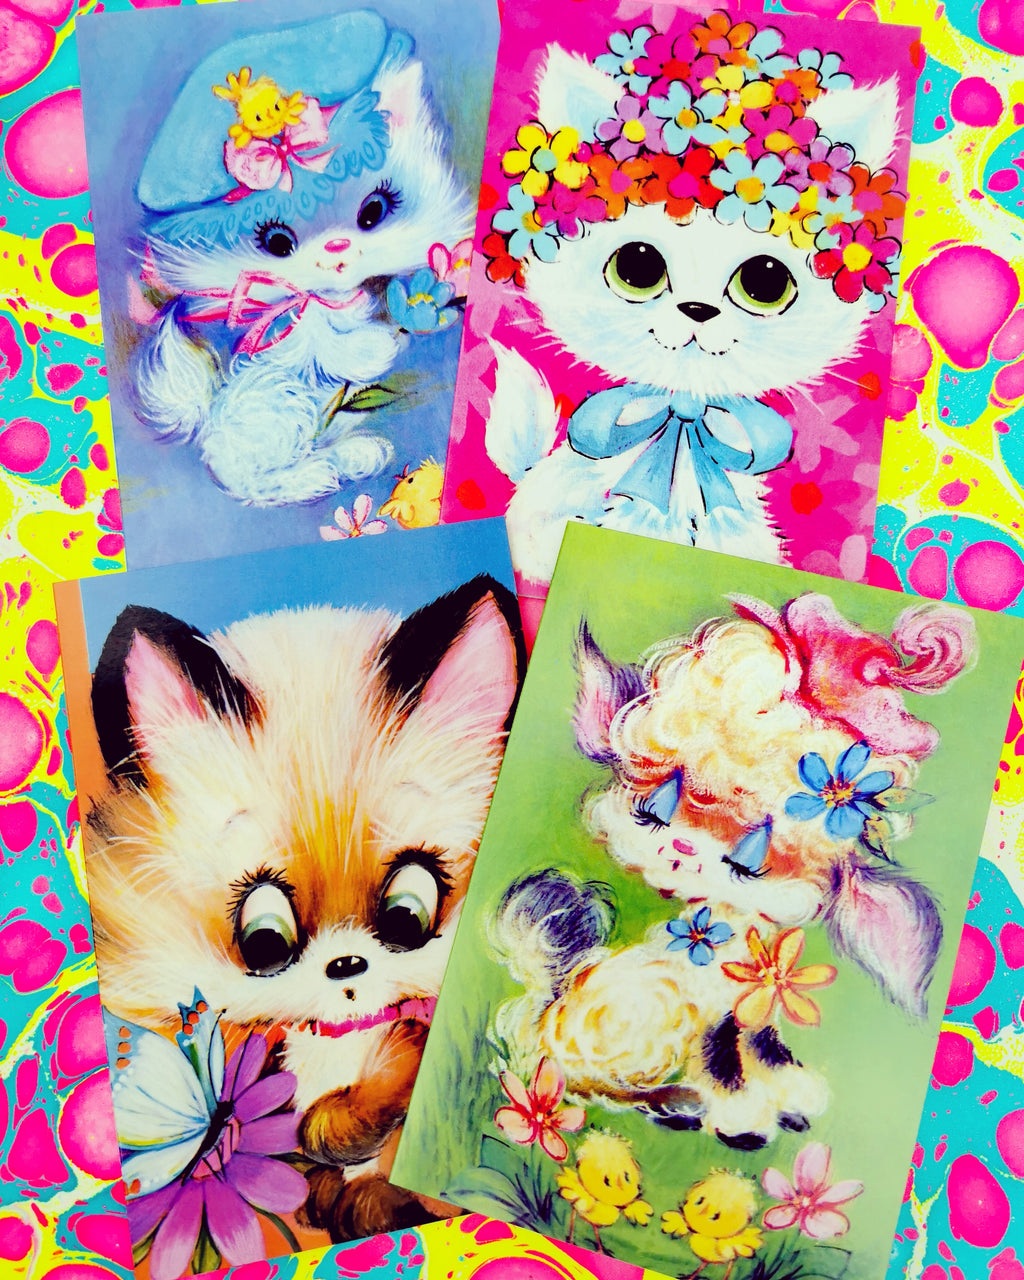 Vintage kitsch cuties greetings cards set, a selection of our fave cards to send a bit of joy!!

Set of 4 cards

17cm x 12cm 

